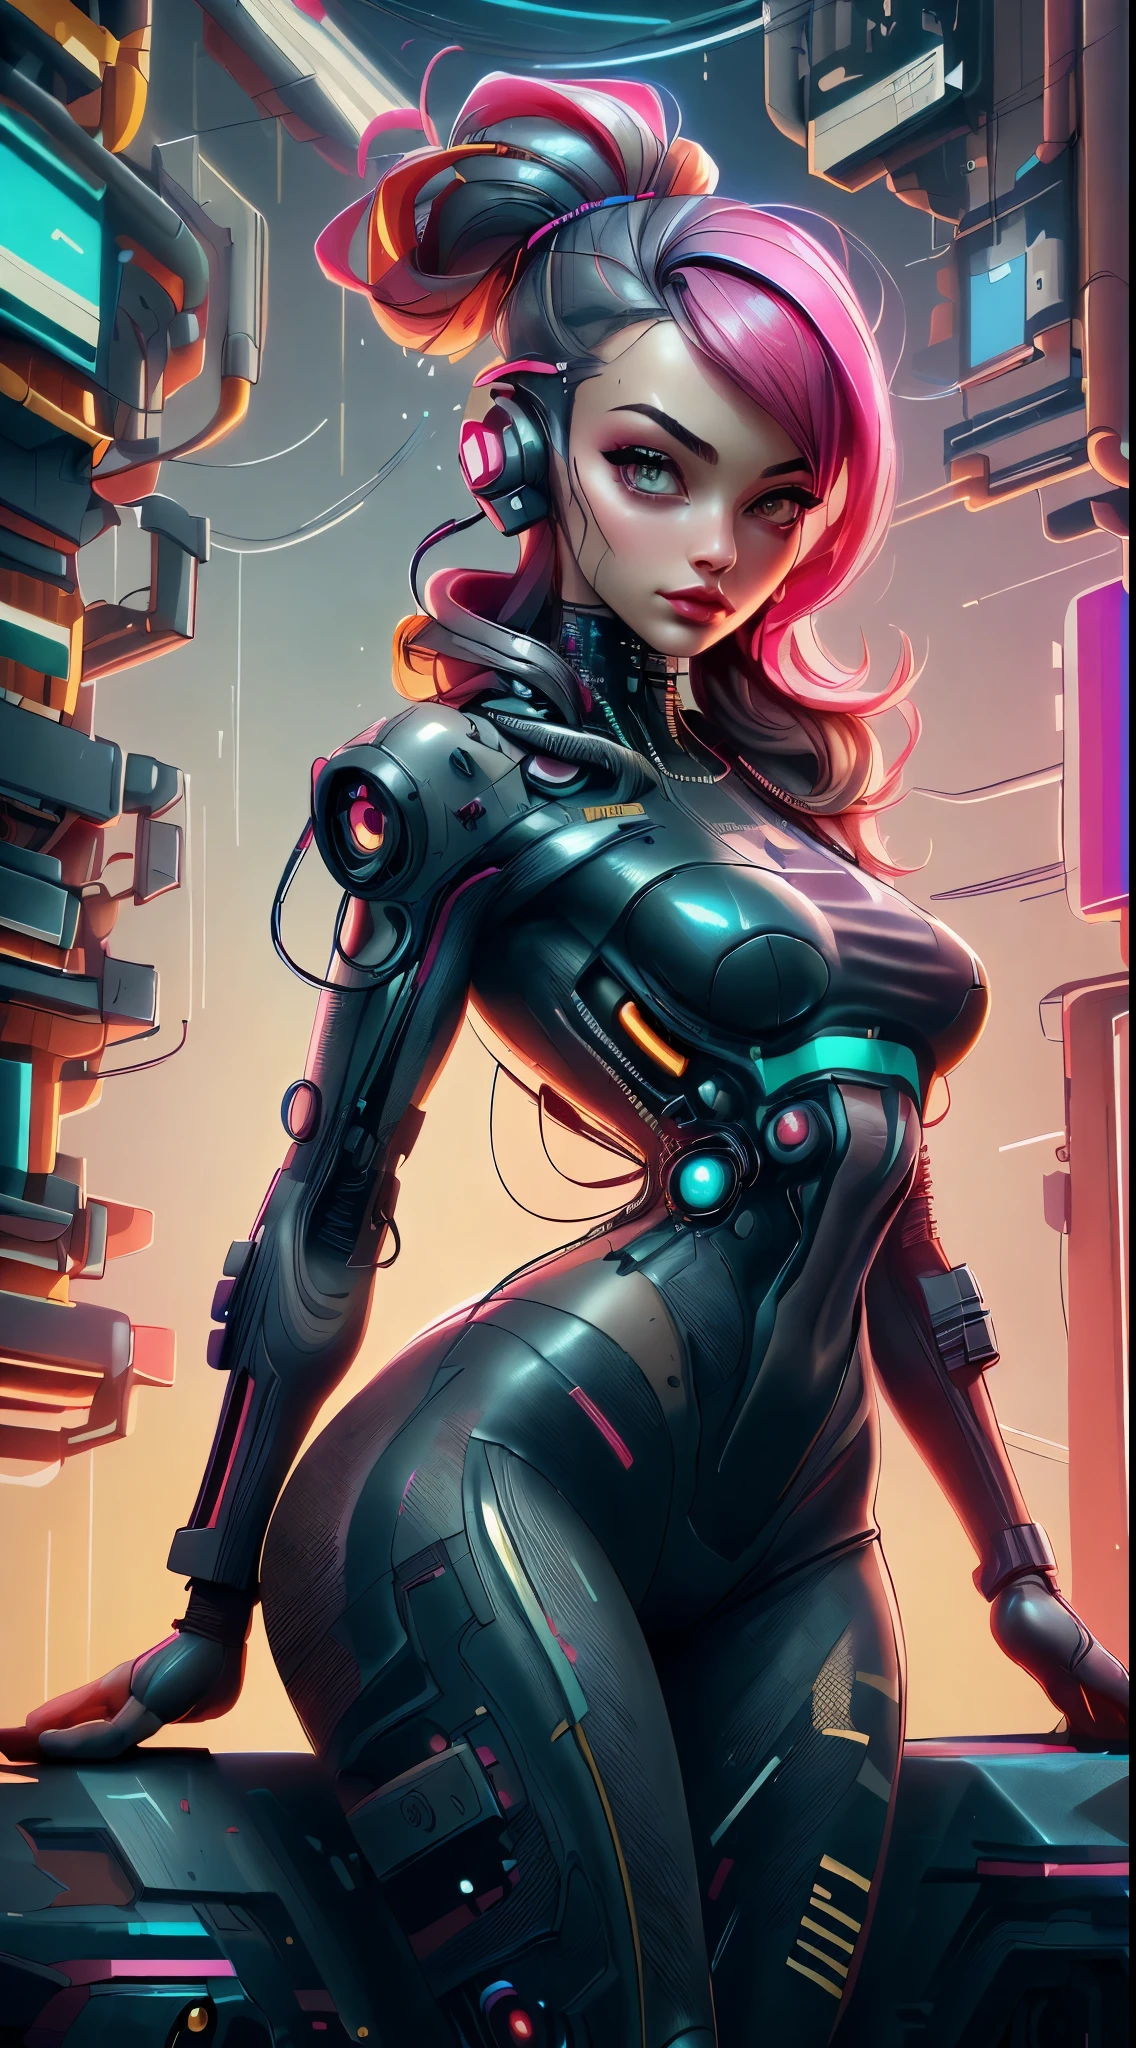 ((Long shot: 1.4, dynamic pose: 1.4)), (( 1 young woman alone:1.5)), (( beautiful, sensual and self-confident: 1.5)), (( brown eyes light and bright, cyberpunk hair:1.5)), ((ultra detailed:1.5)), sensual smile, beautiful full and shiny lips, with tattoo on arm and cheek, handsome hairstyle:1.2, cyberpunk, handsome cyberpunk, dreamer, (( beautiful and detailed hair, soft and shiny:1.3)), dark atmosphere, cyberpunk clothing, ultra-realistic 8k, cyberpunk 20 years. a model , the portrait, highly detailed 32k digital art, beautiful digital artwork, Cyborg Cyberpunk. ((colors, cyan, greens, pink, brown: 1.2)), 8k realistic digital art, soft neon lighting on the face and body, ((highly detailed: 1.4), ((masterpiece)), (hyper detailed and beautiful: 1.3), (Photorealistic: 1.4)